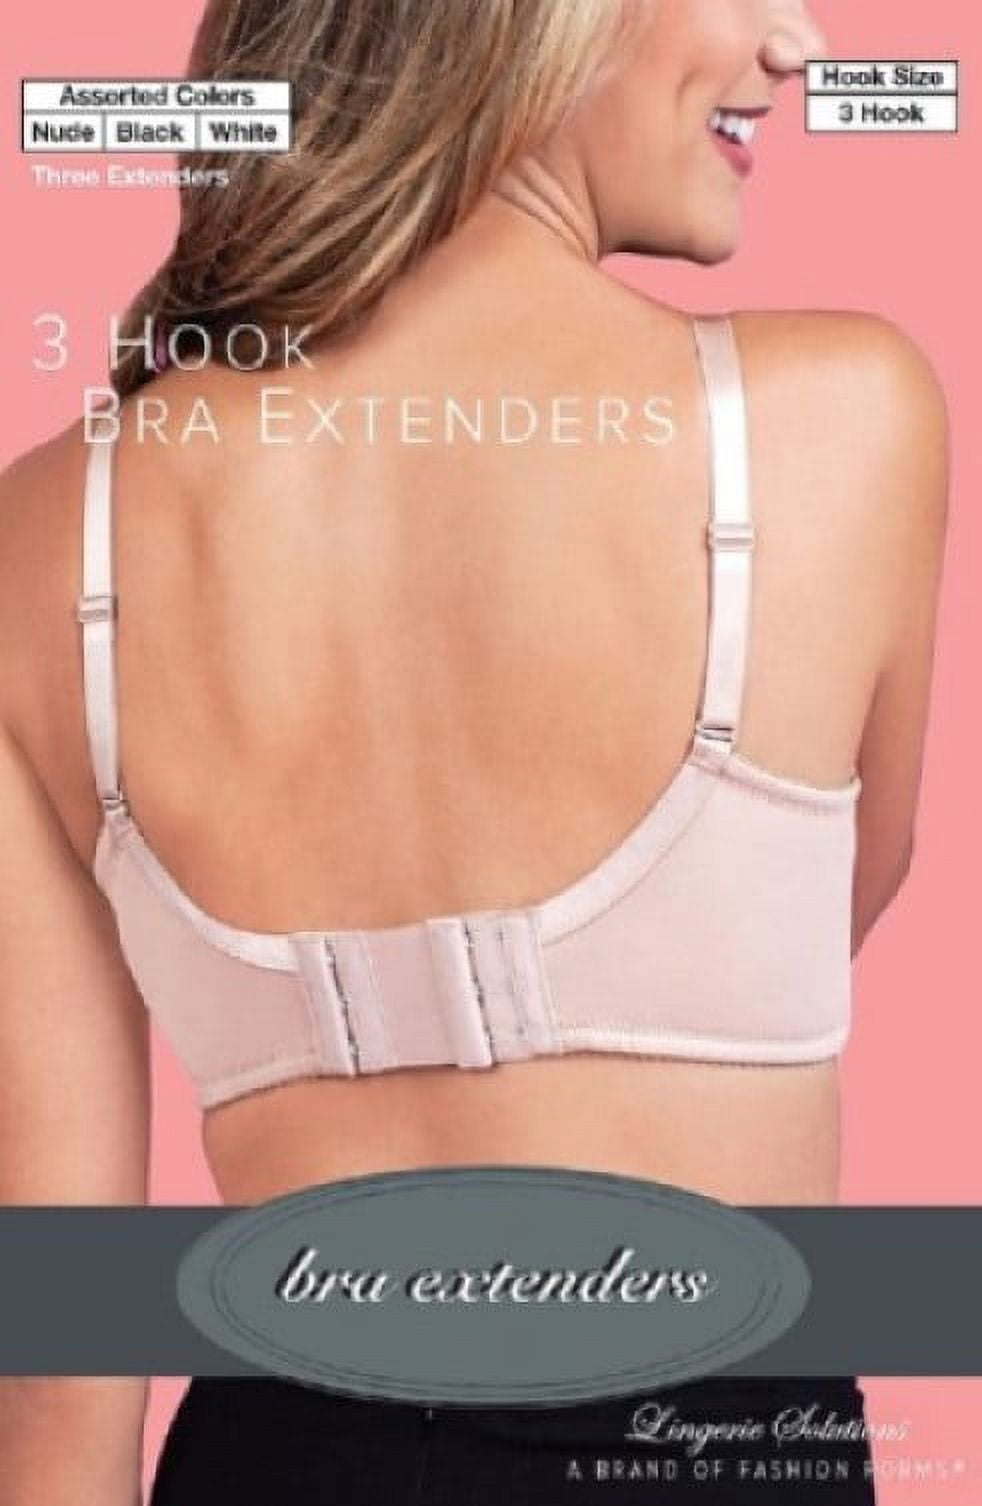 Perfection 3 Hook Bra Extenders For Tight Fitting Bras - 3 Pack  Black/White/Nude 